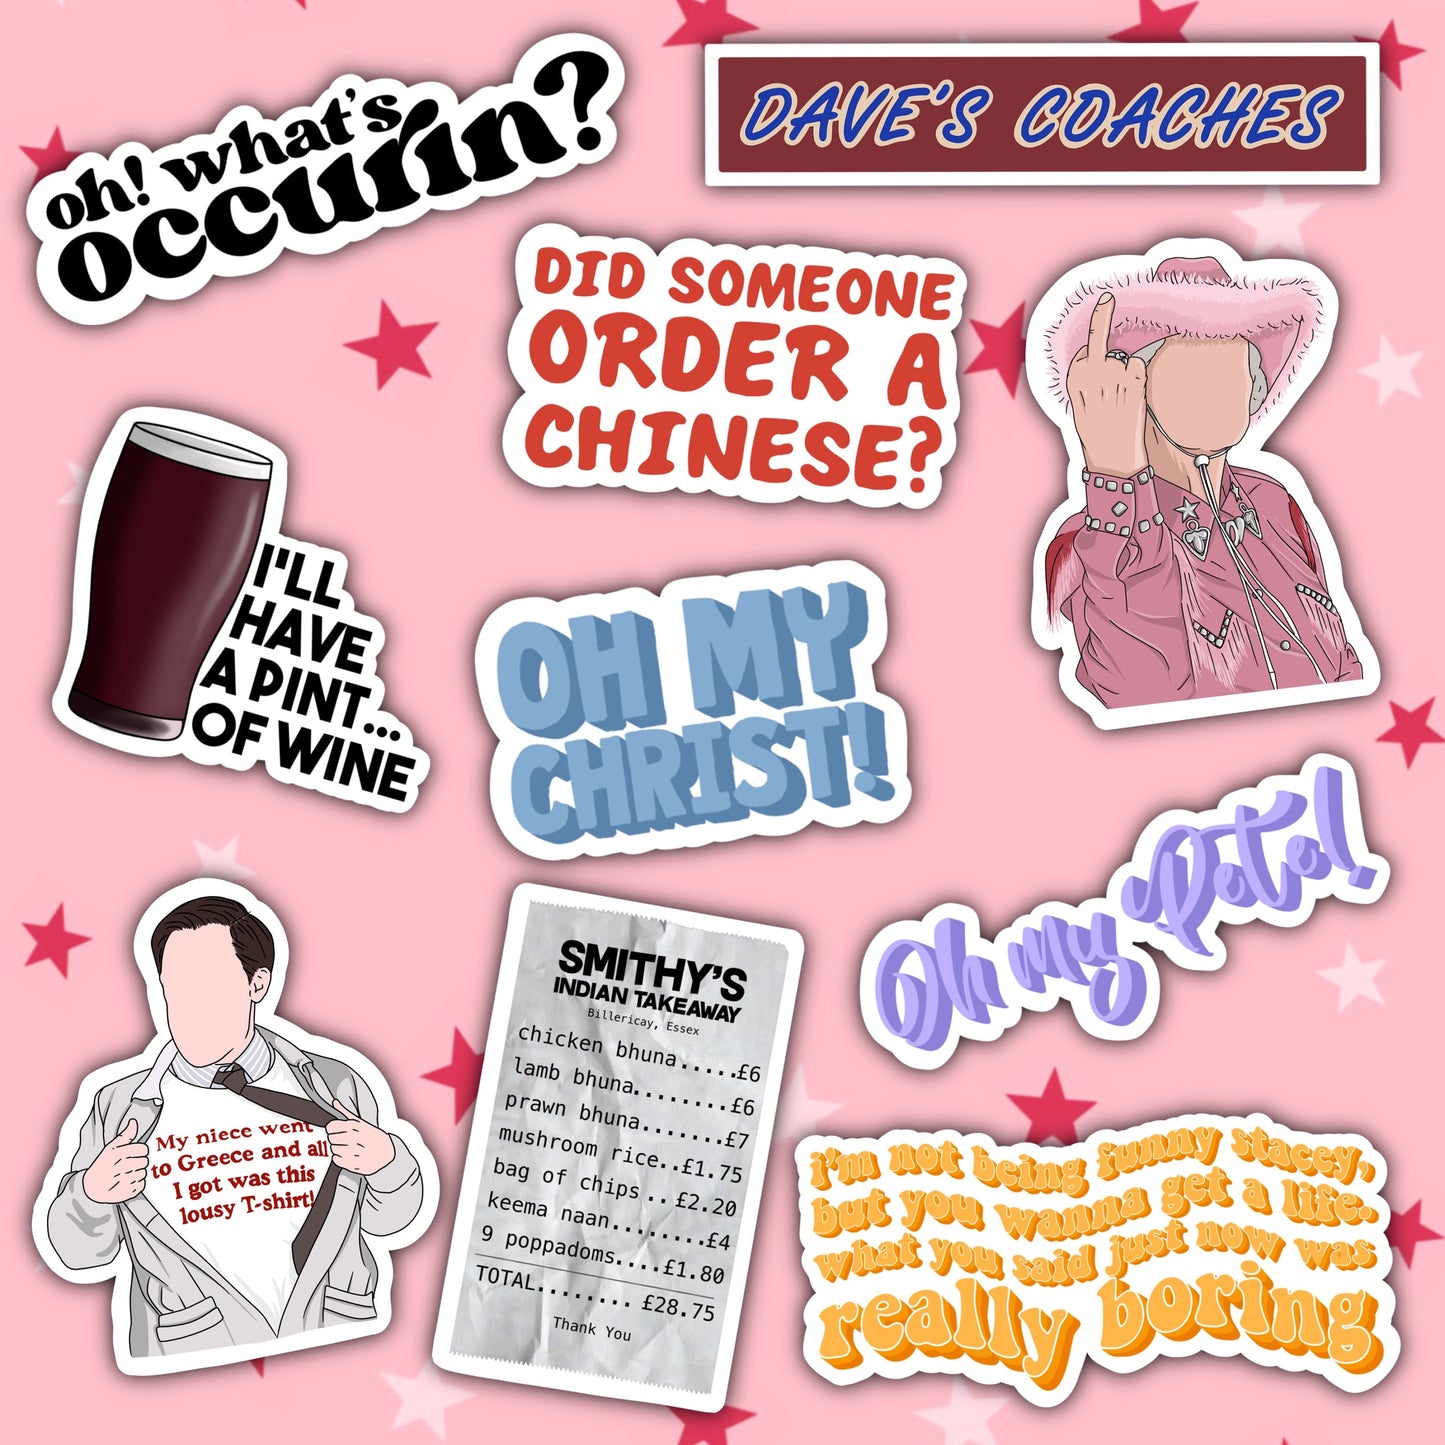 I'll Have a Pint... Of Wine | Nessa | Gavin and Stacey Stickers